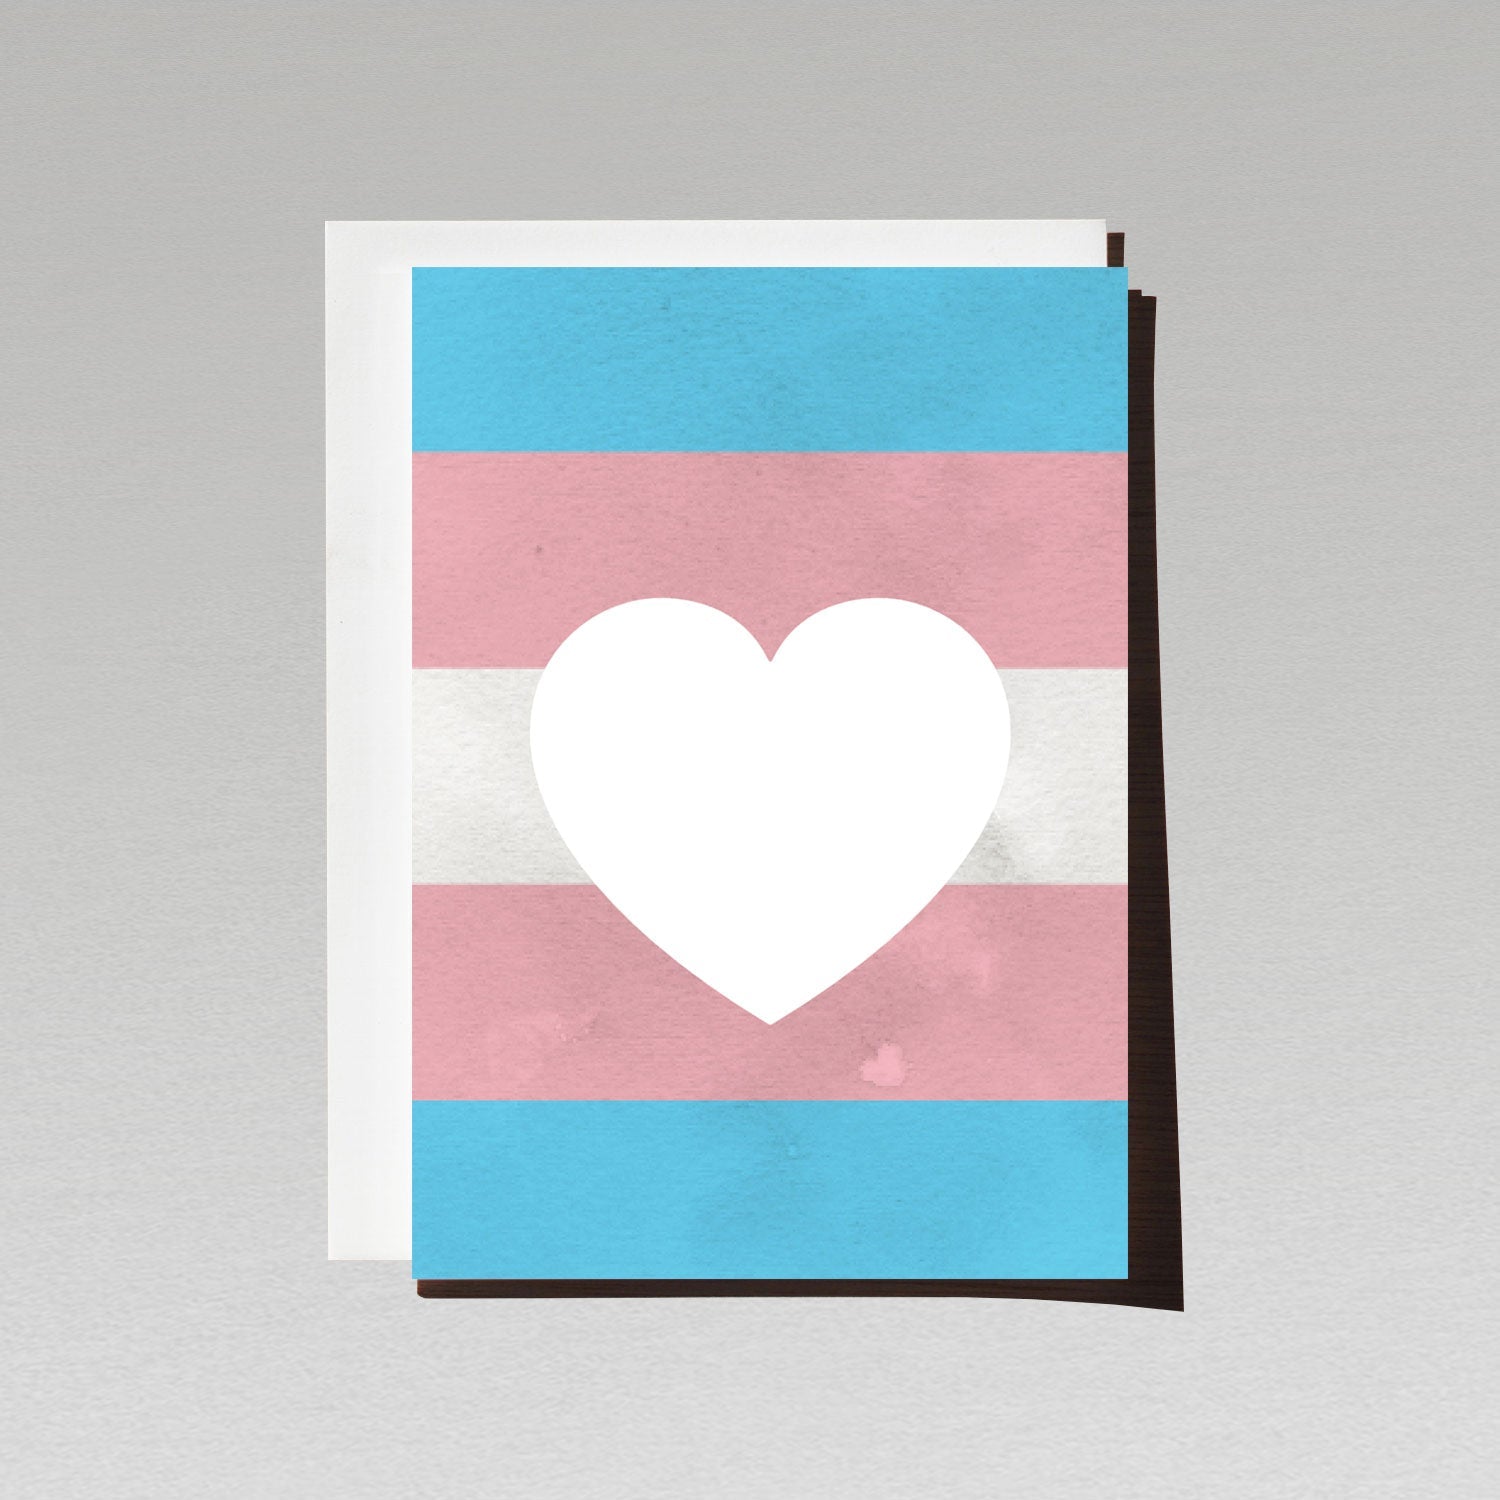 Greeting card with large white love heart sitting on LGBTQI transgender flag background